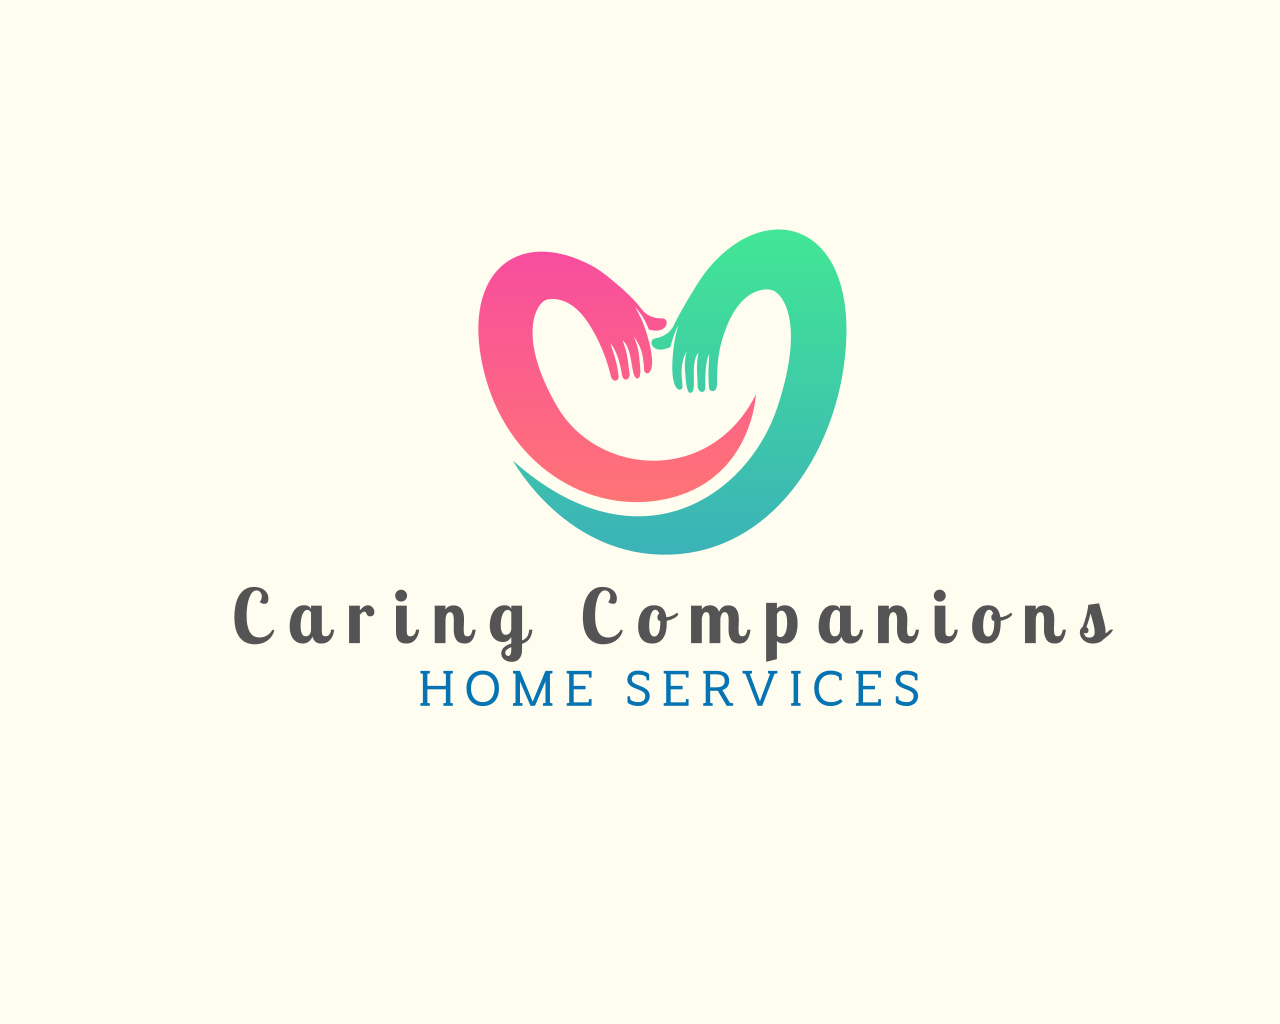 Home services - companionship, house cleaning, shopping